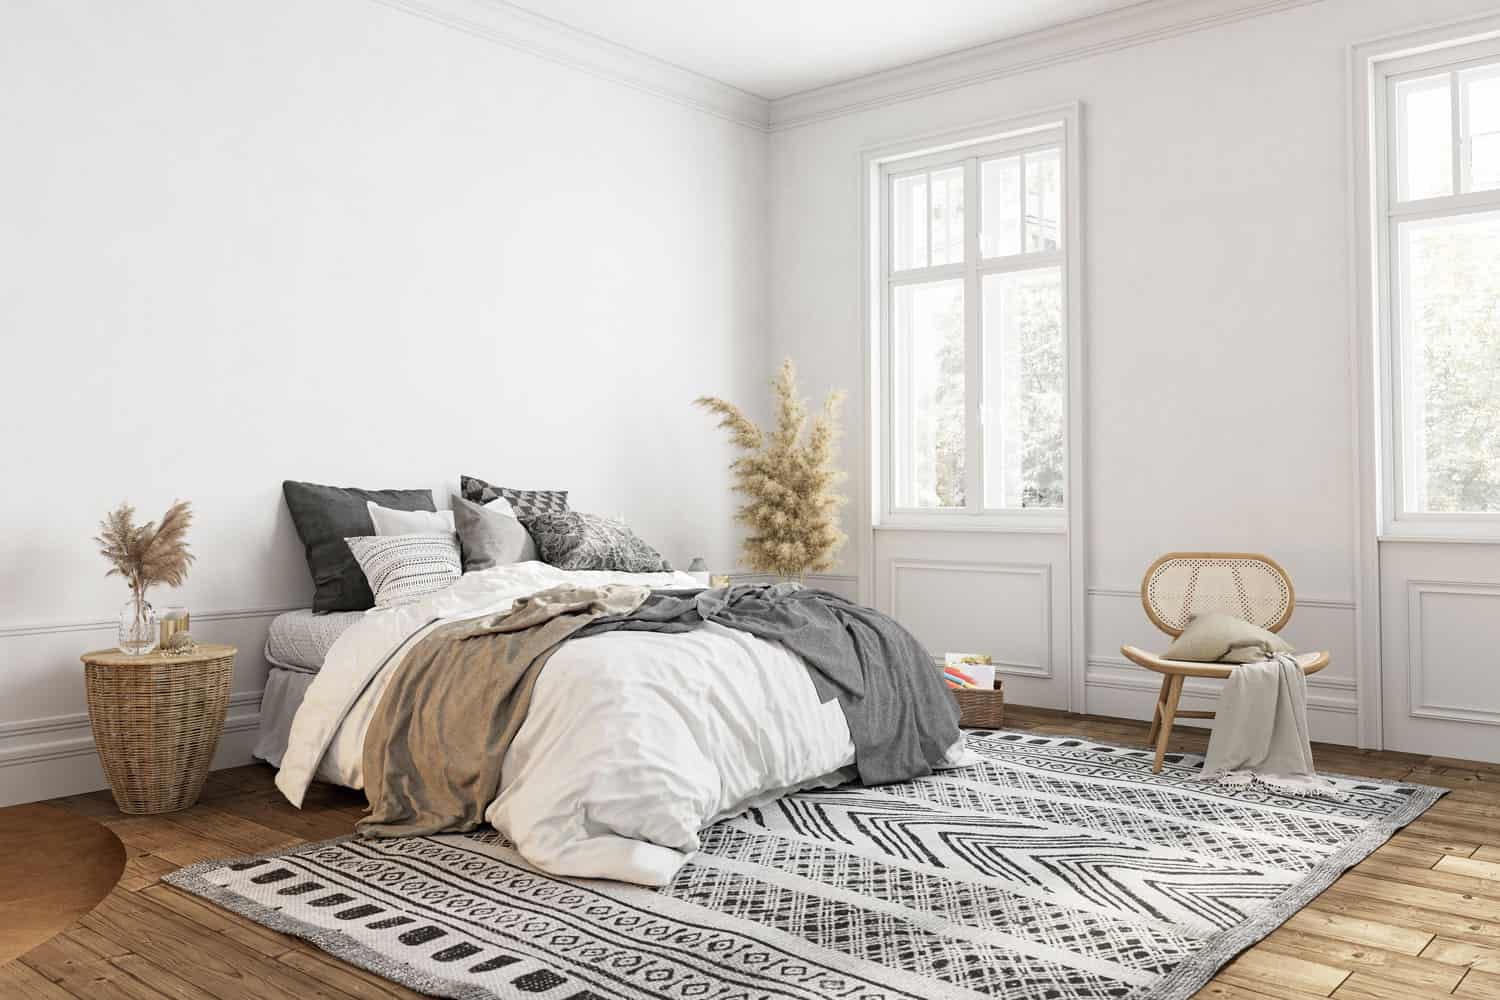 A bohemian themed bedroom with white walls, wooden flooring and throws on the bed